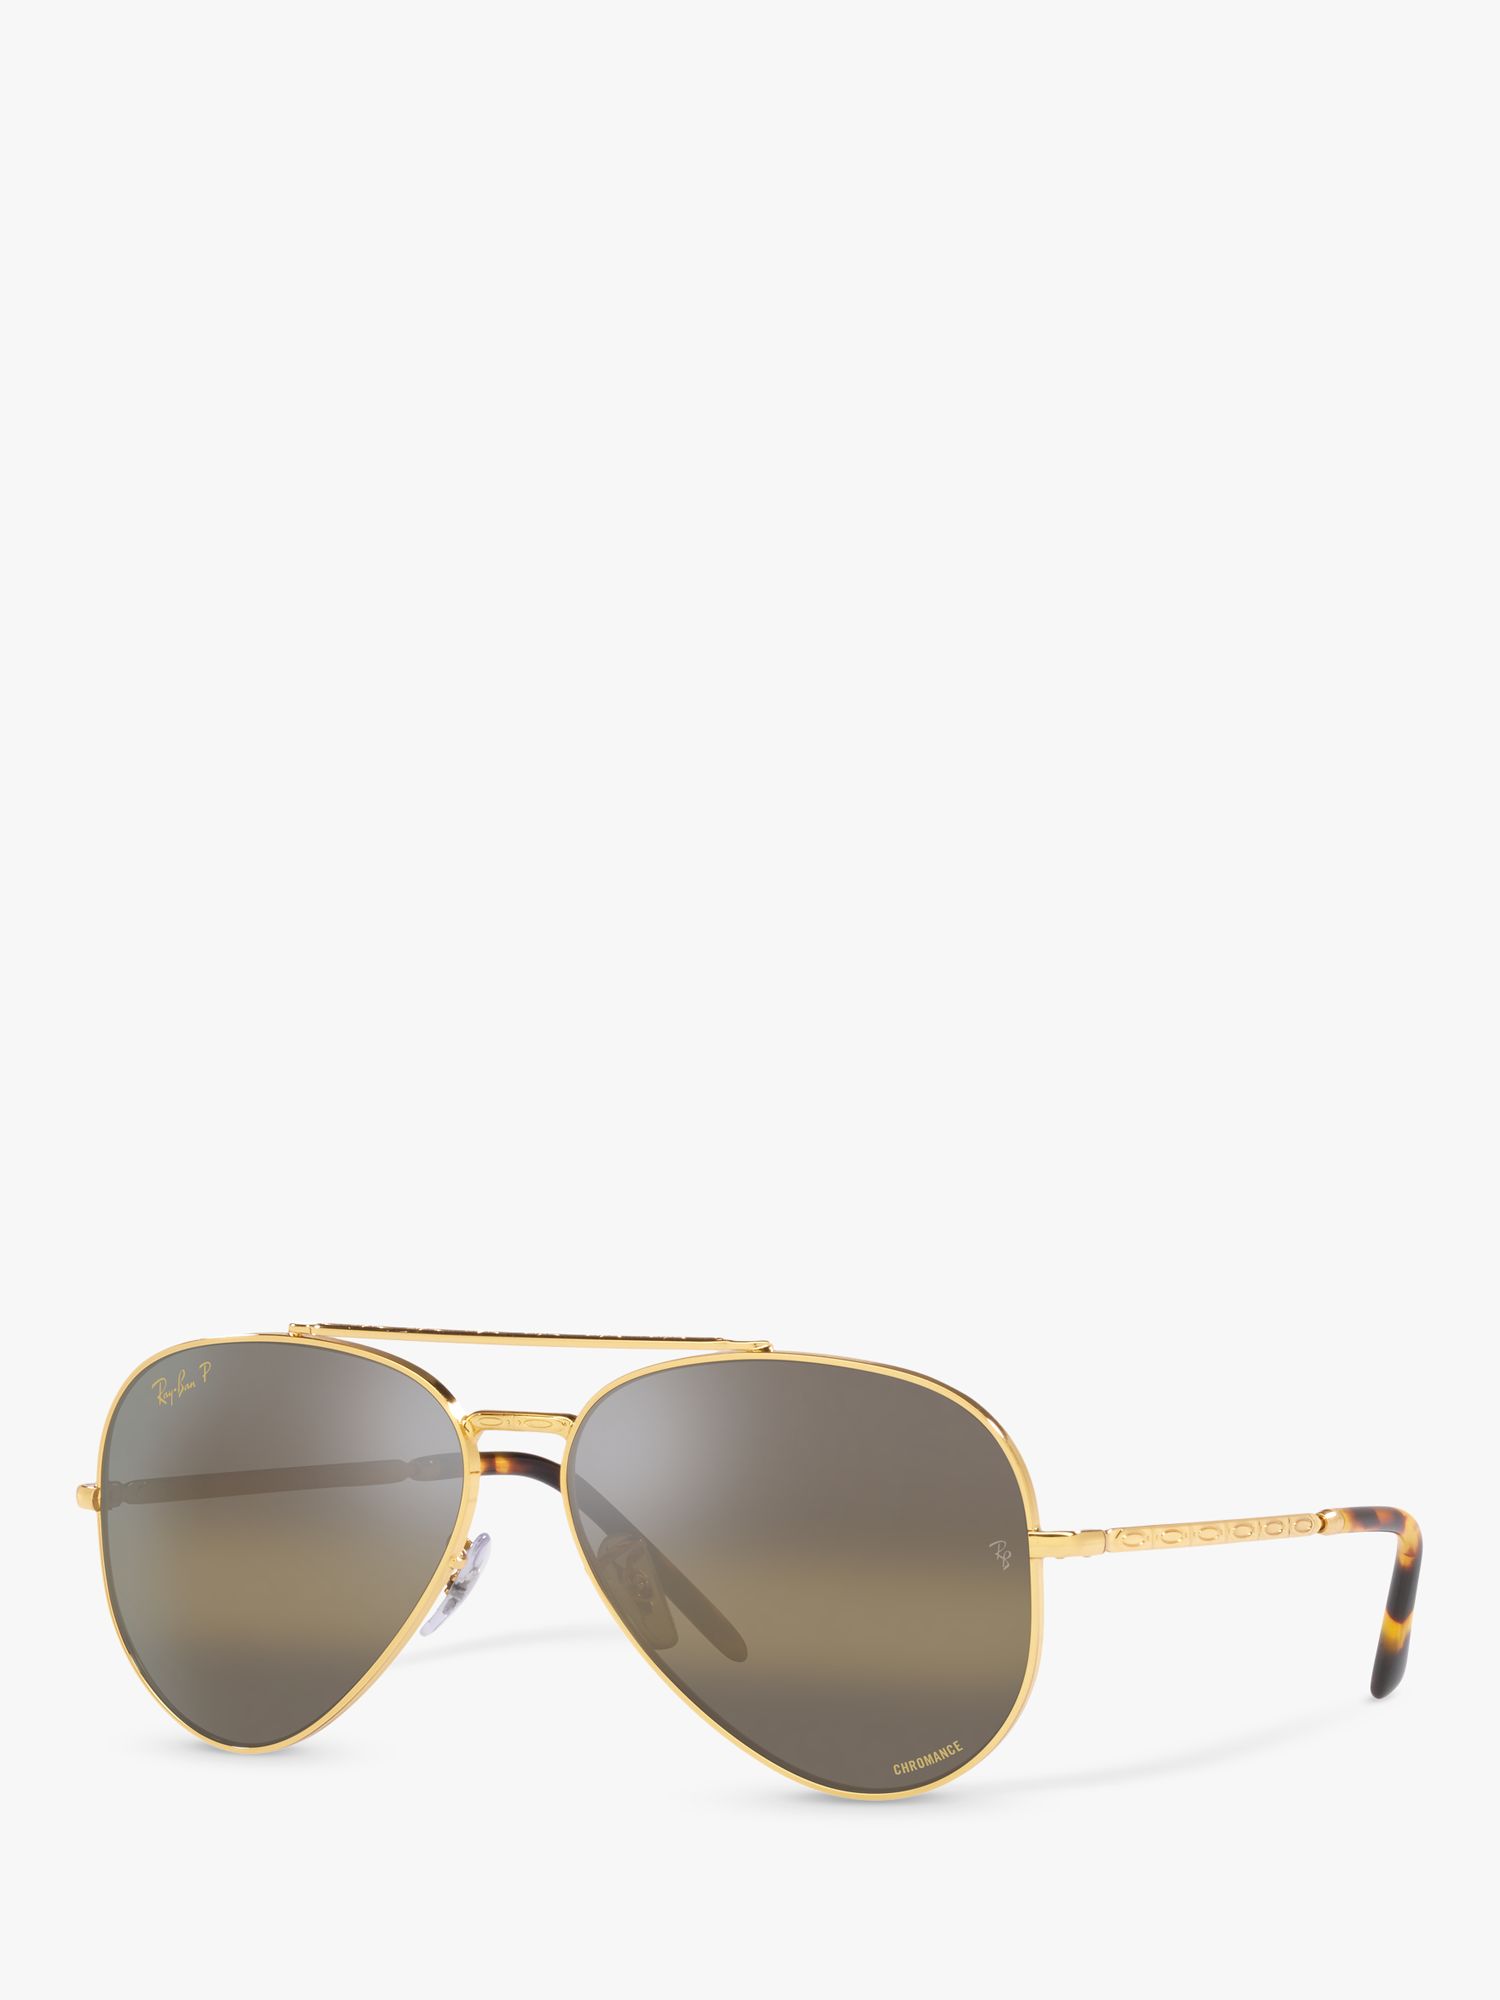 Legend Gold Ray-Ban RB3625 New Aviator